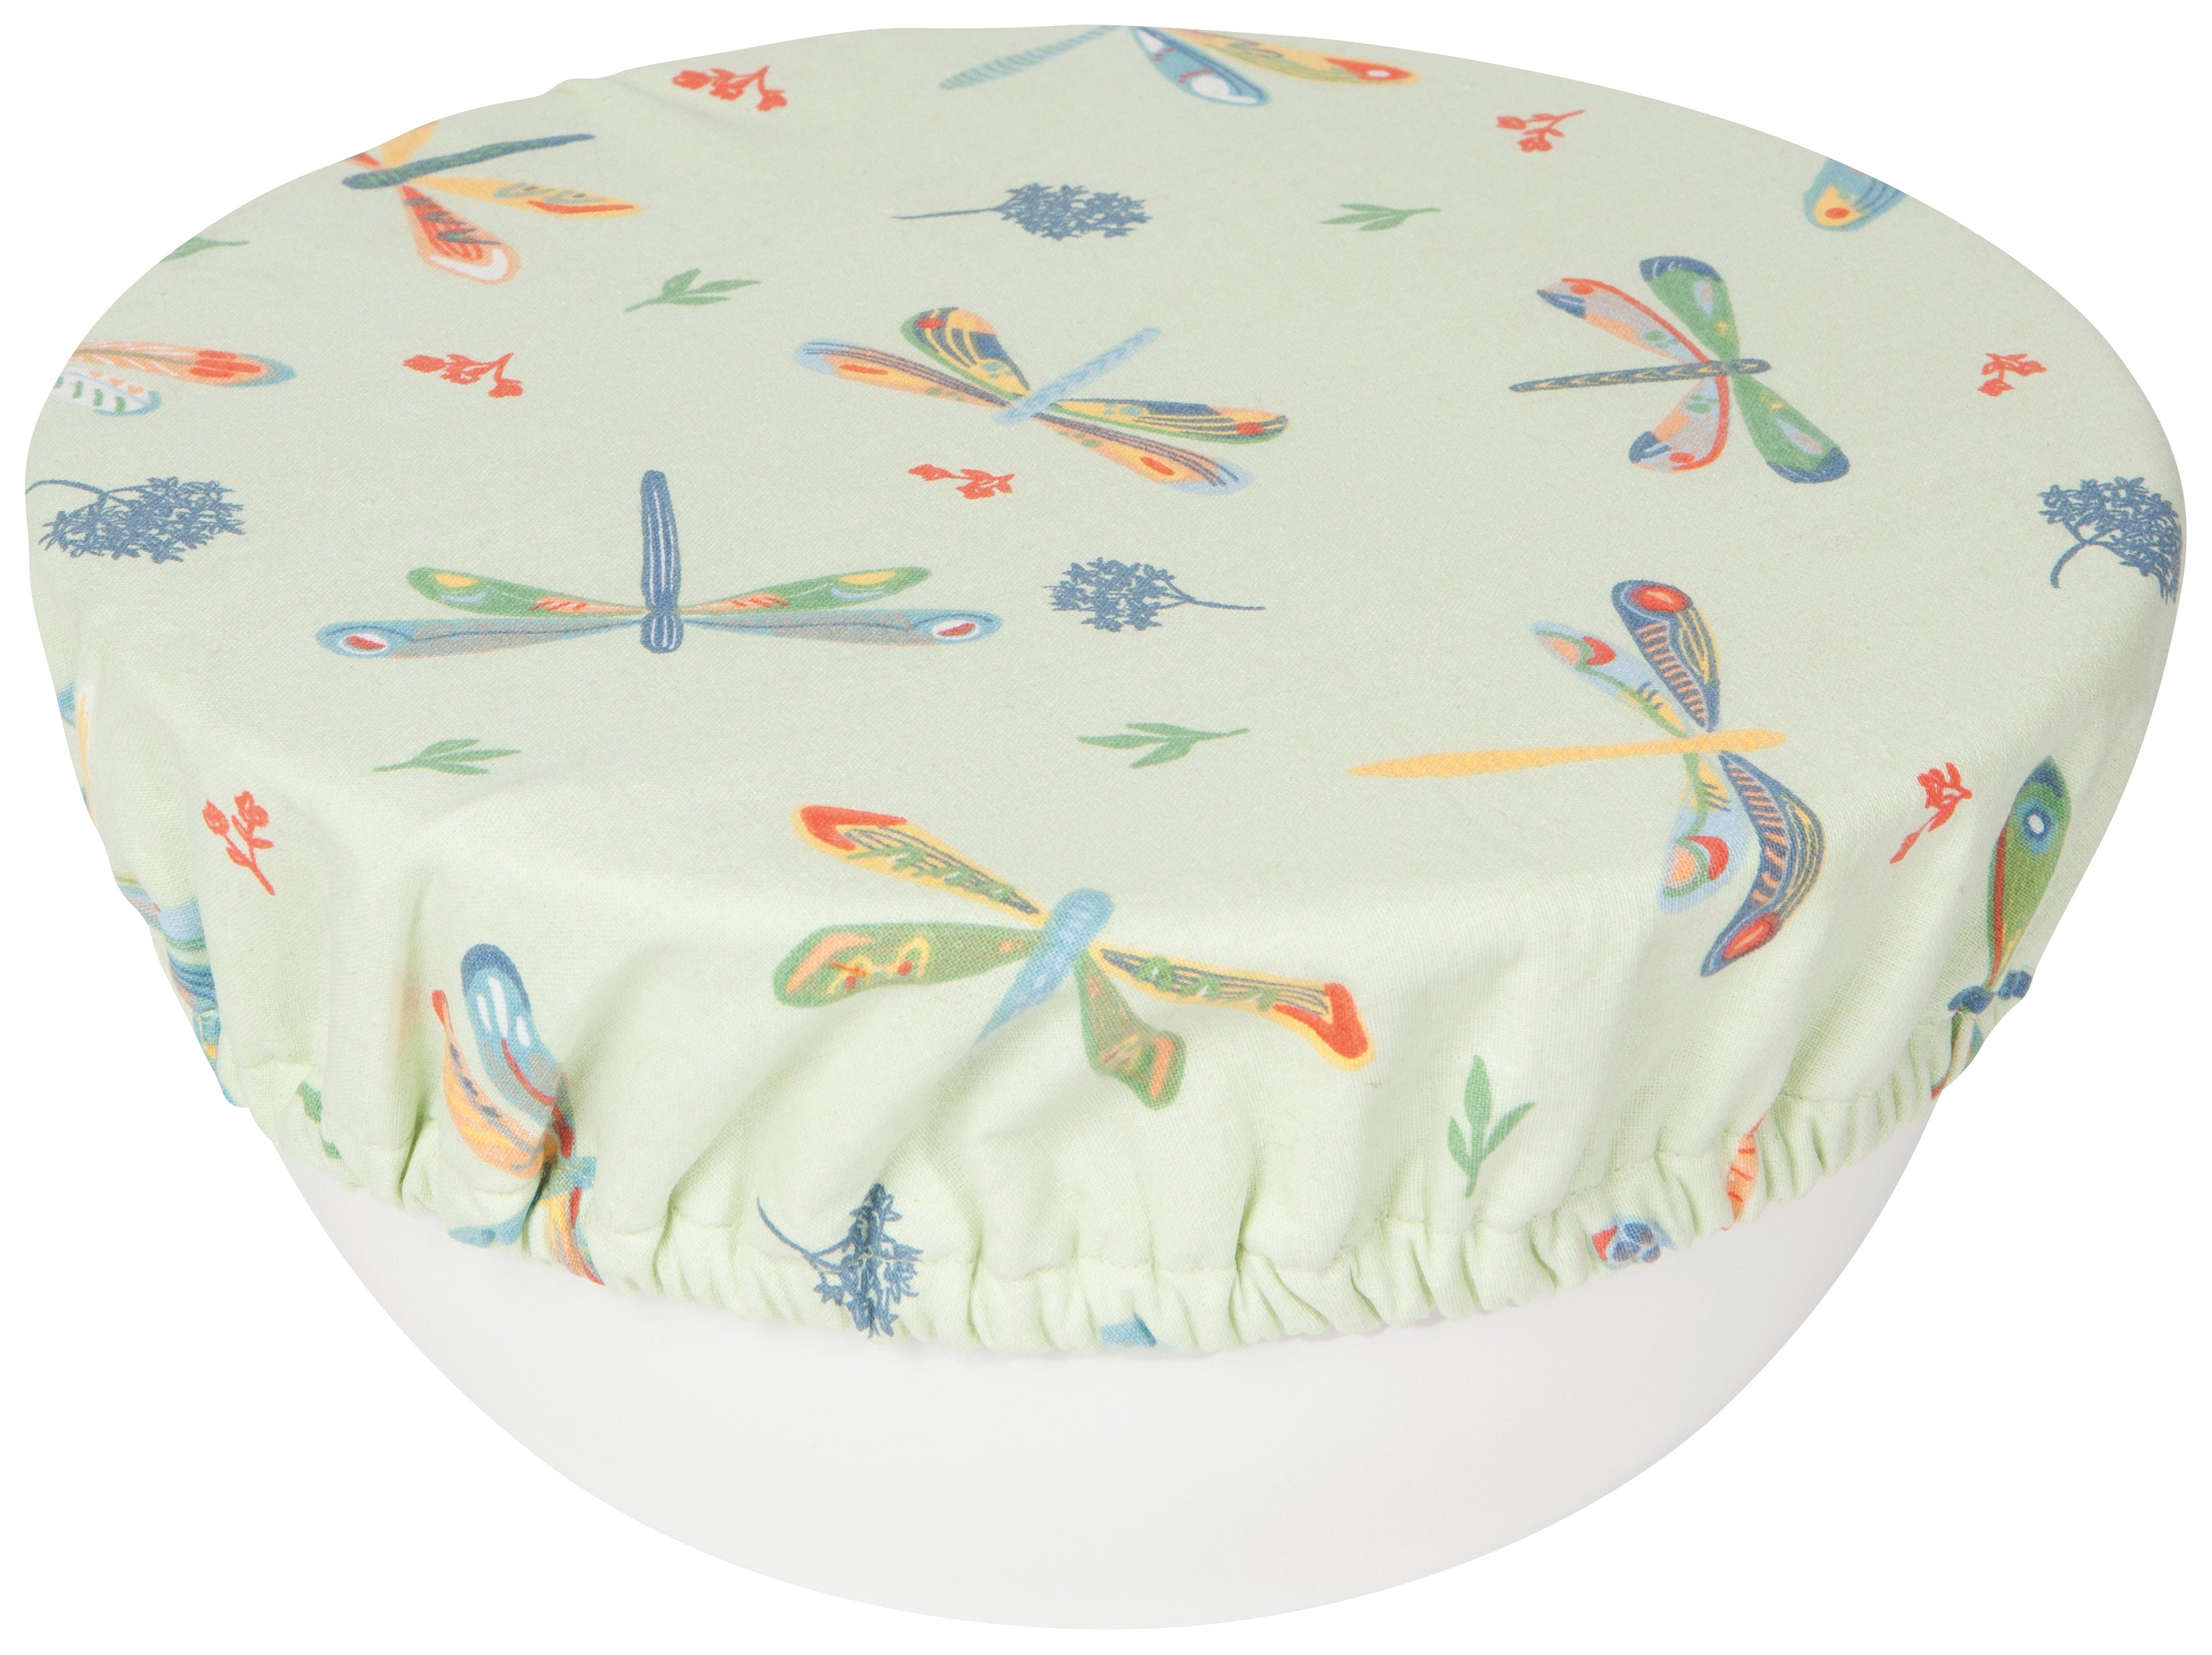 Dragonfly Bowl Covers, Set of 2